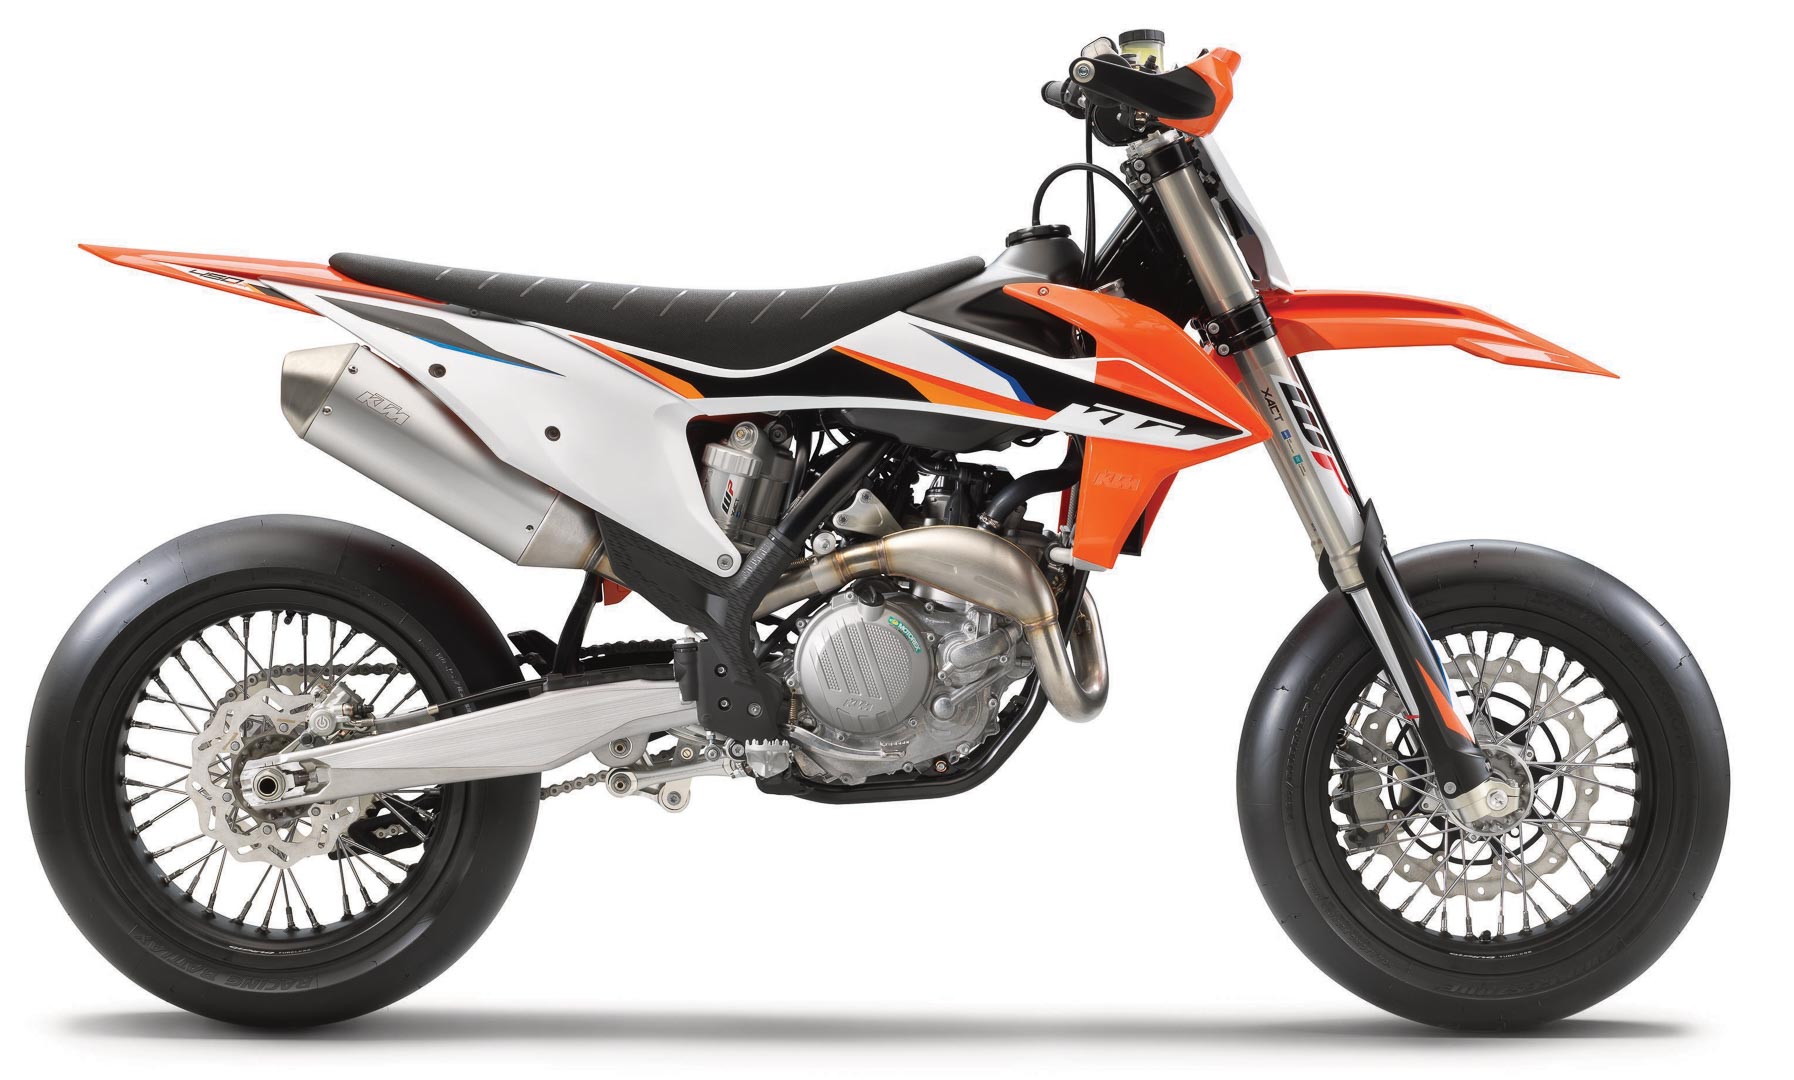 2021 KTM 450 SMR First Look supermoto racing motorcycle 6